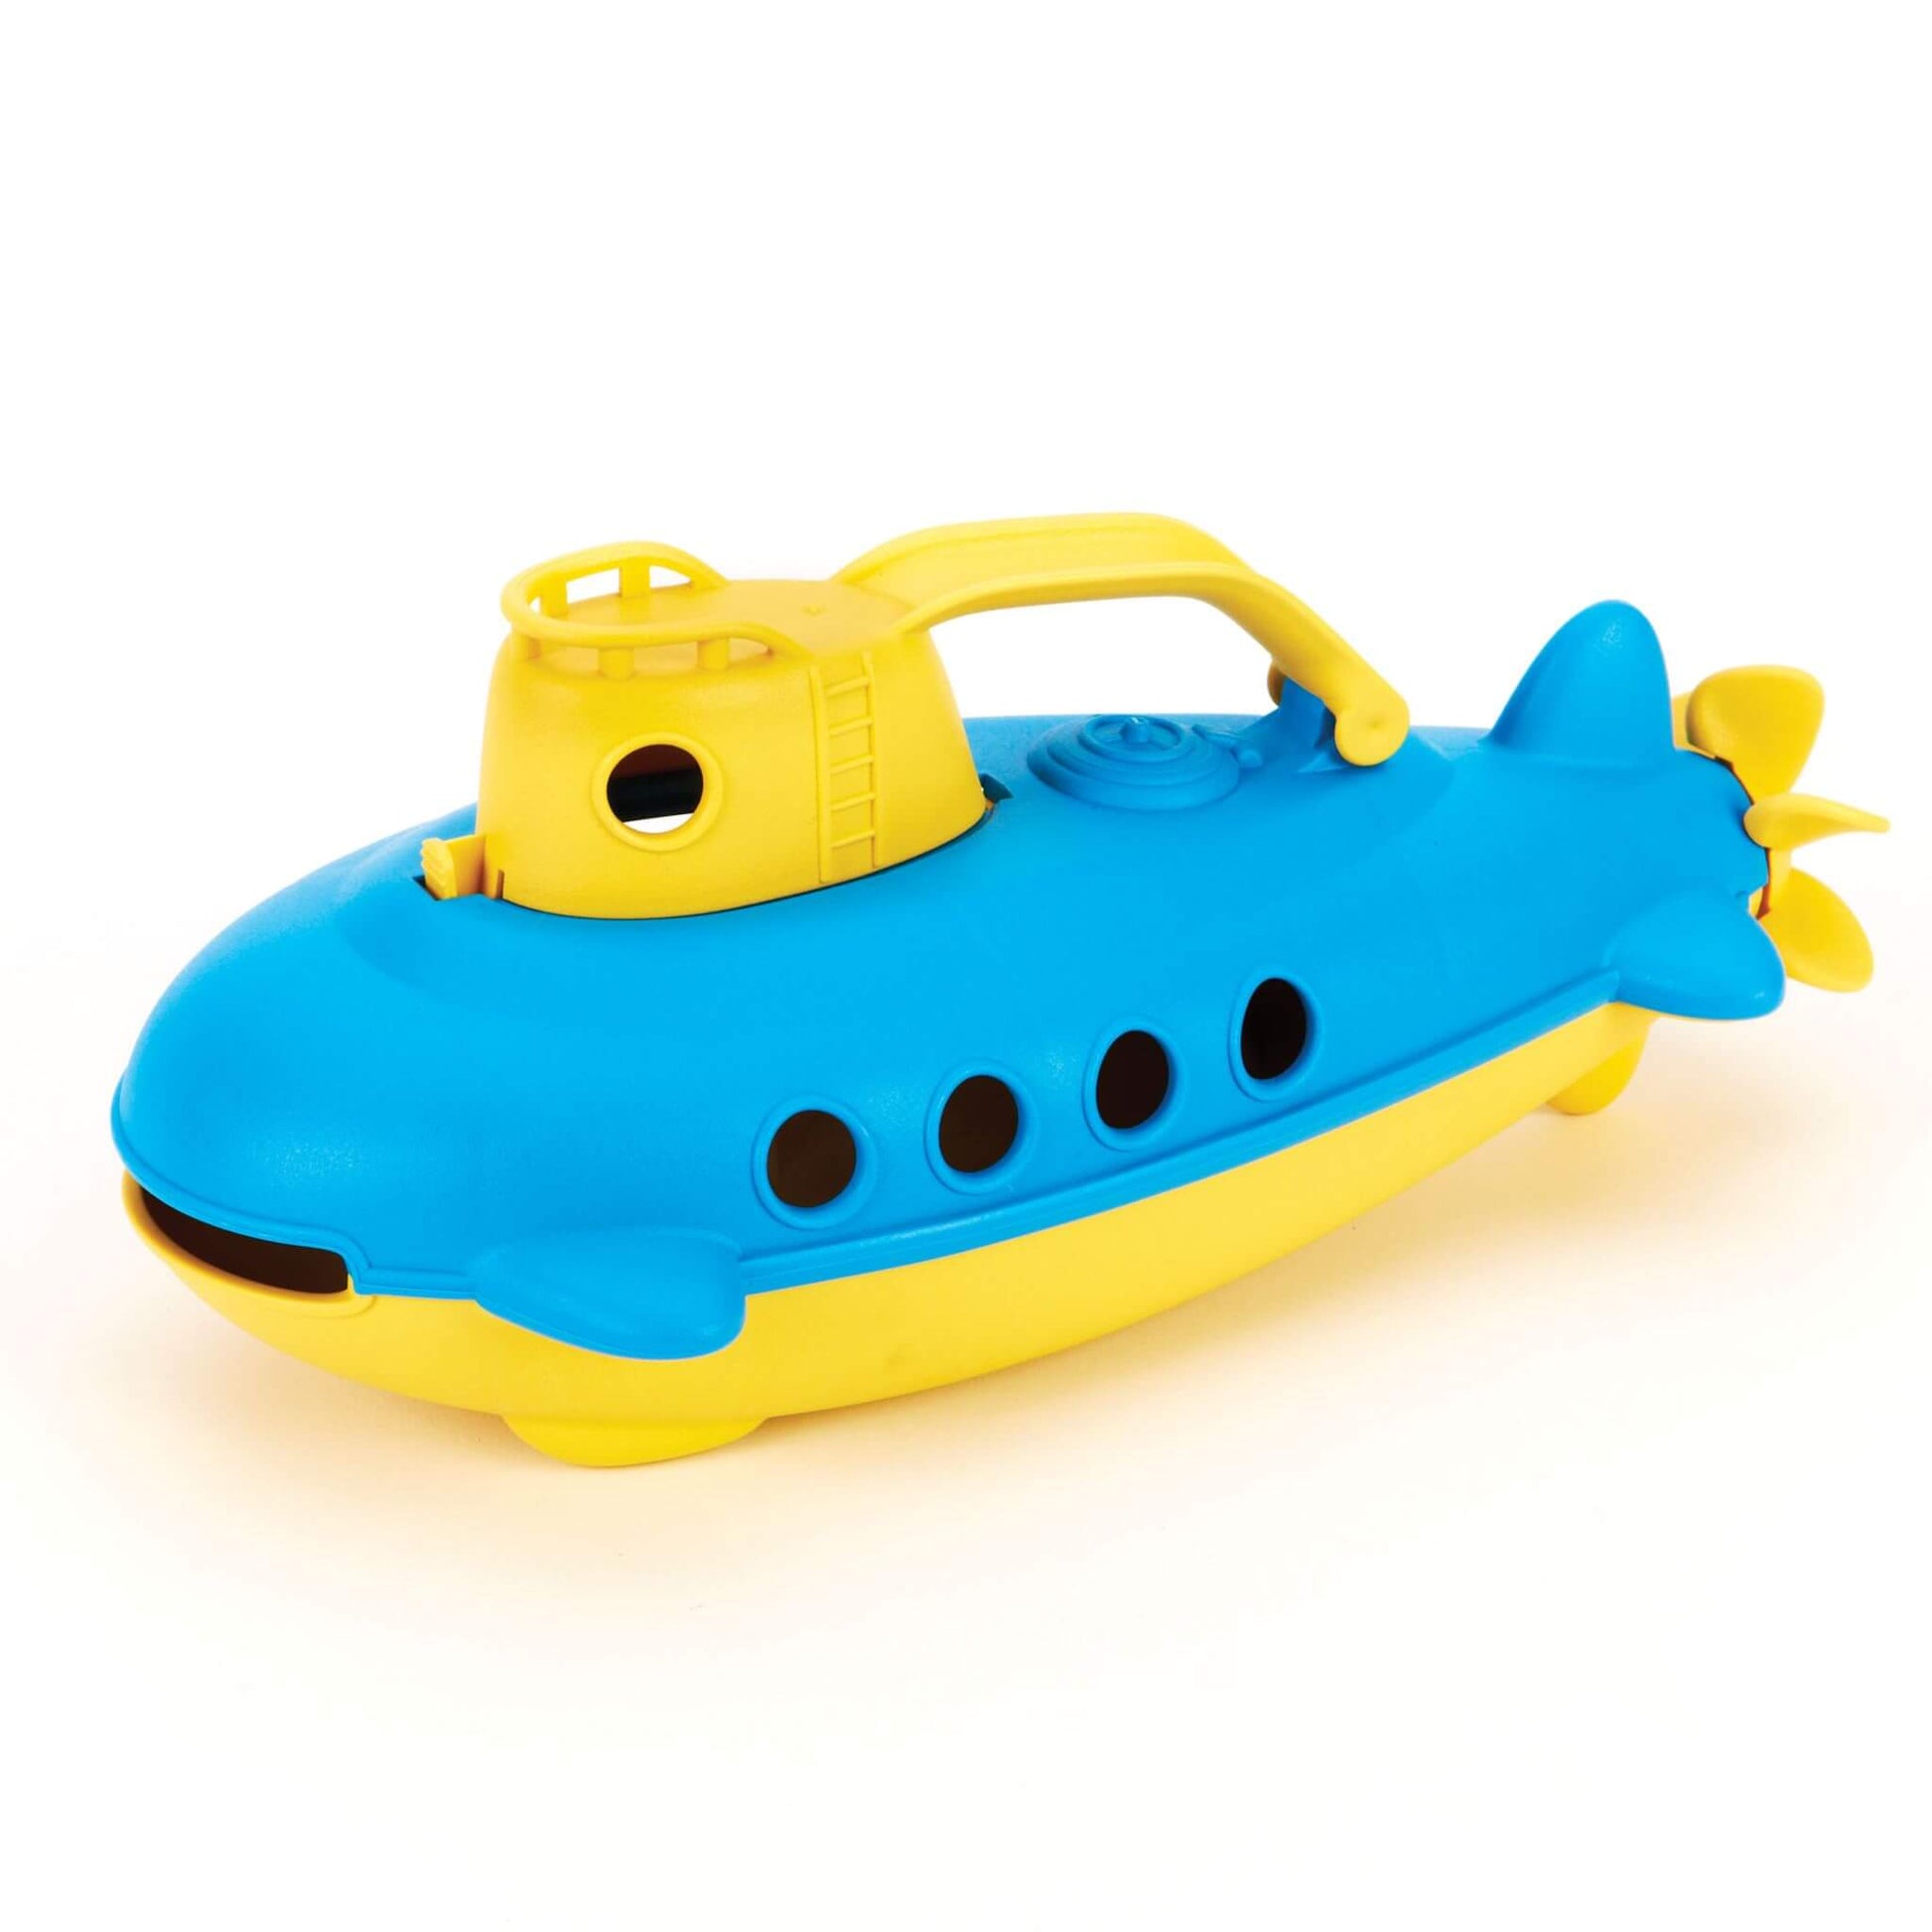 Green Toys Submarine - ethical bath toys made of recycled plastic